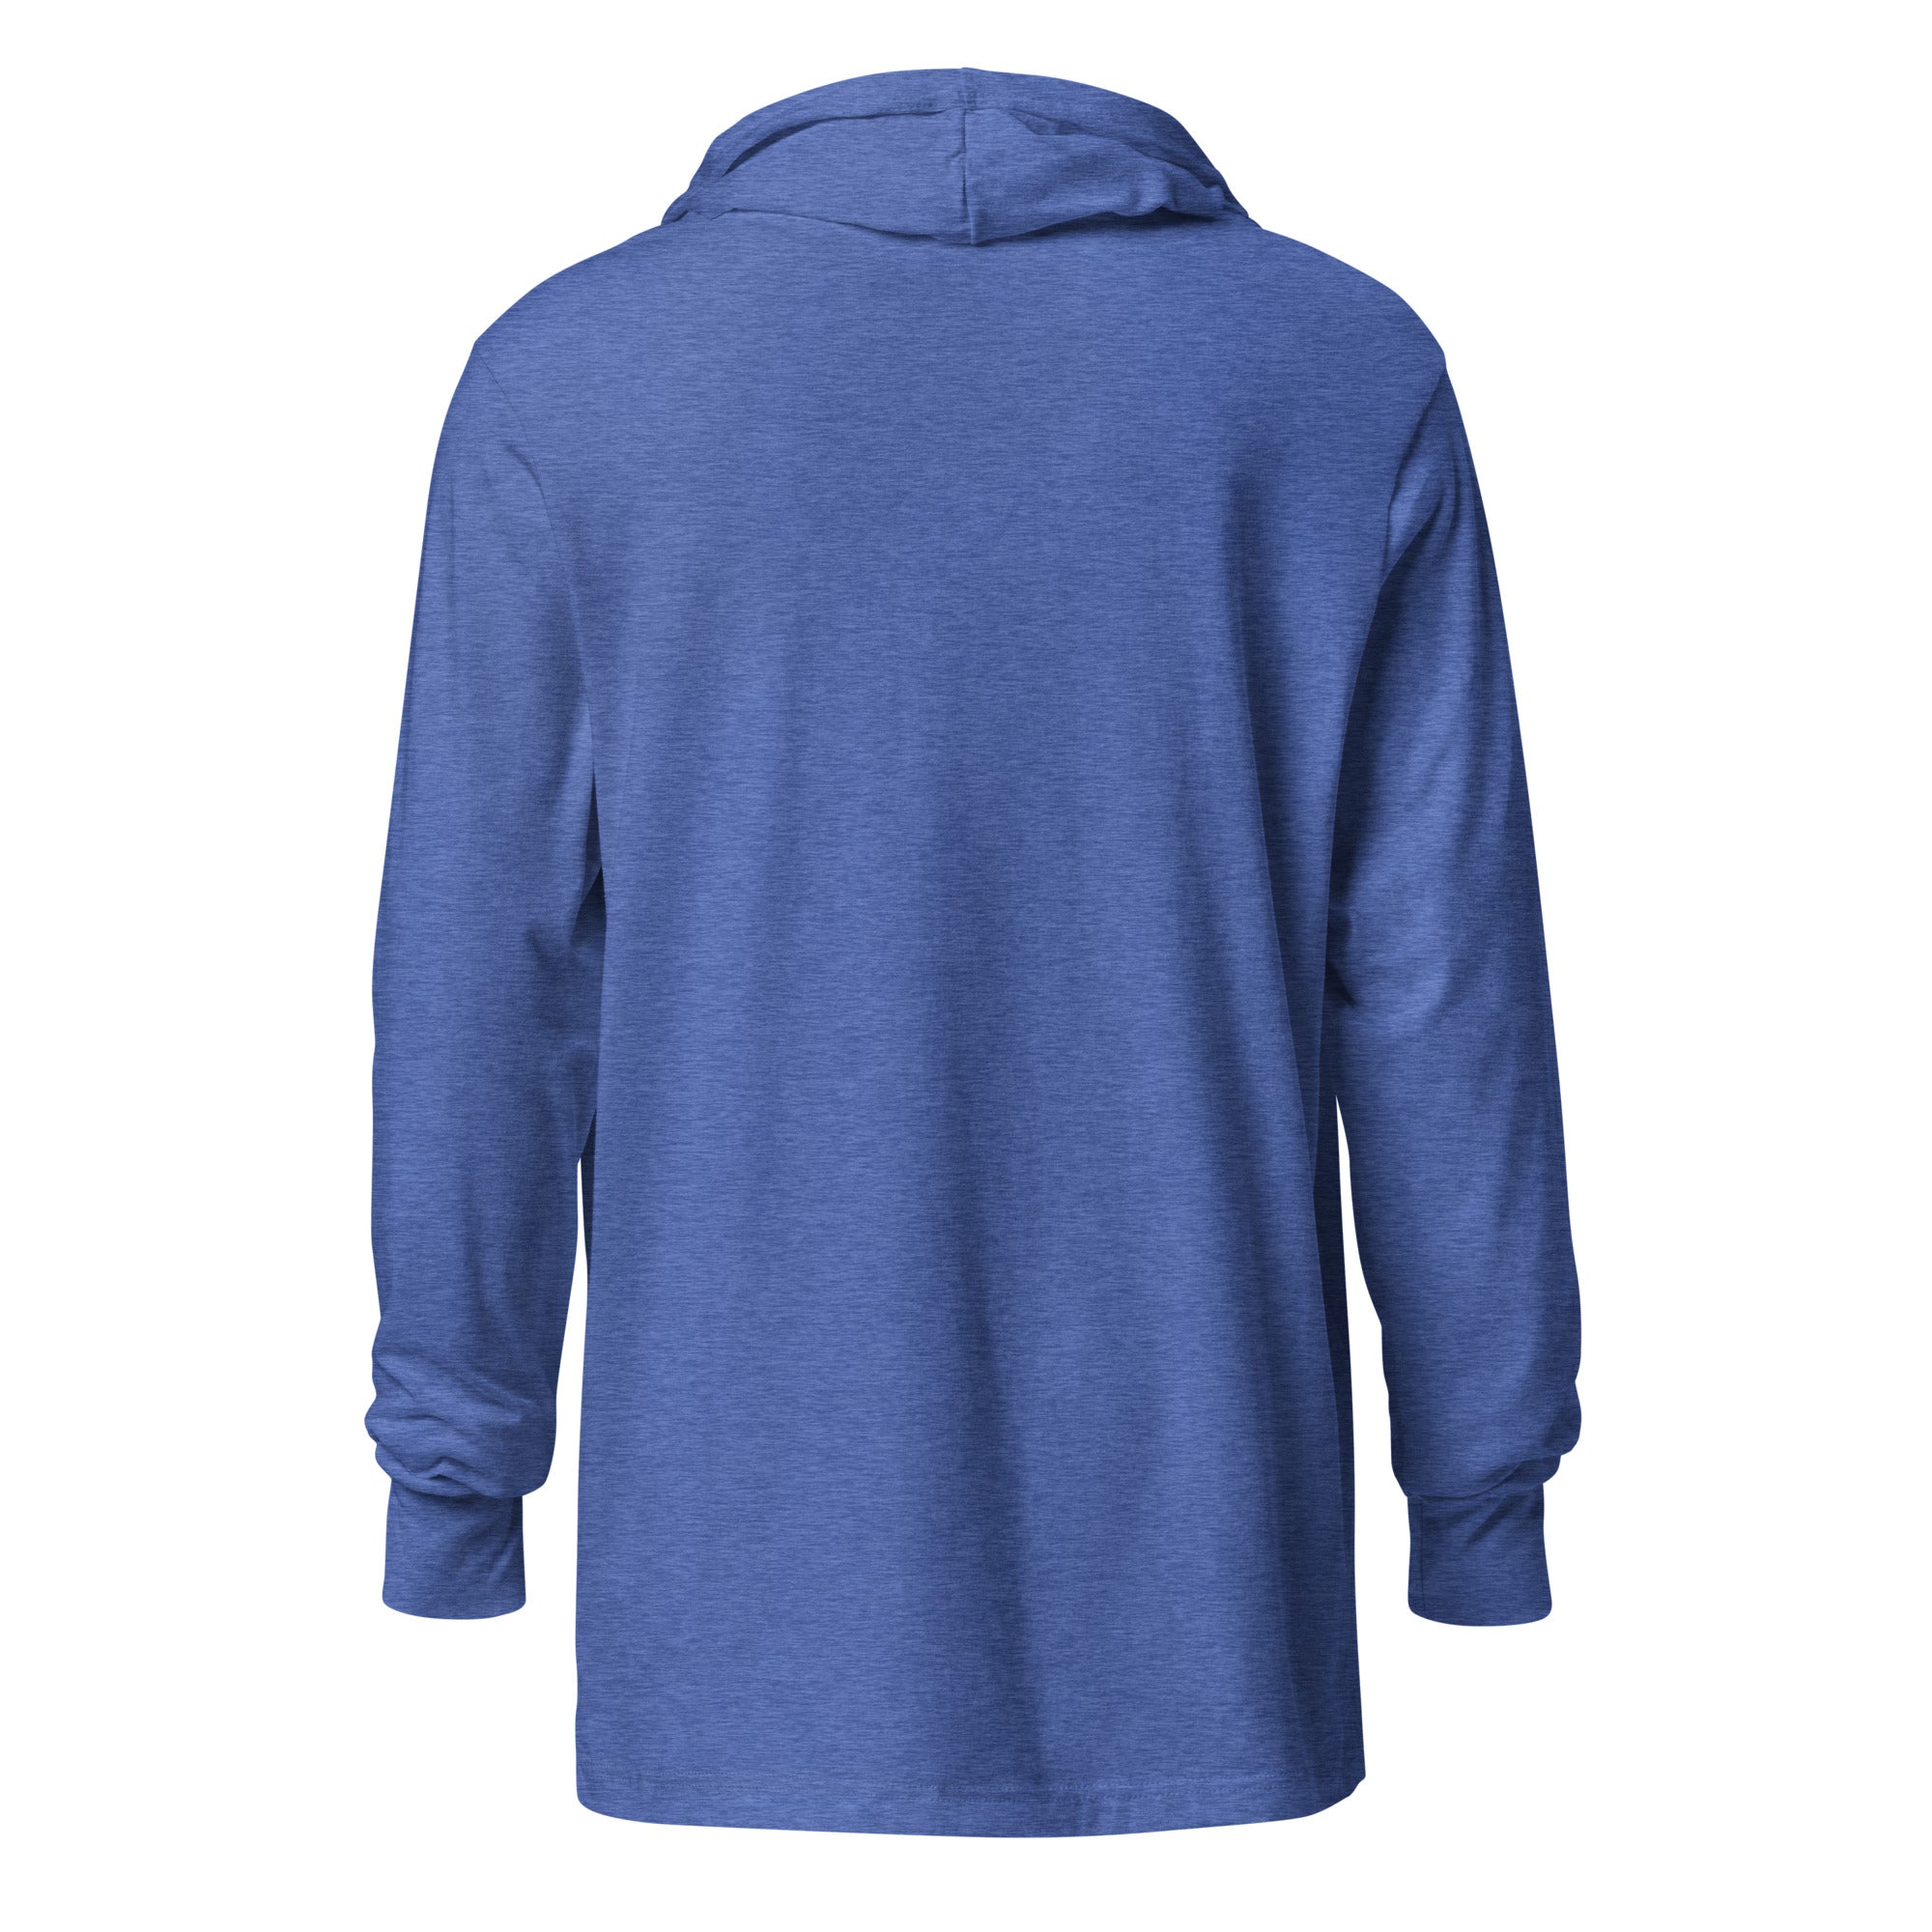 The NSA: The Only Part of Government That Actually Listens Hooded Long-sleeve T-Shirt